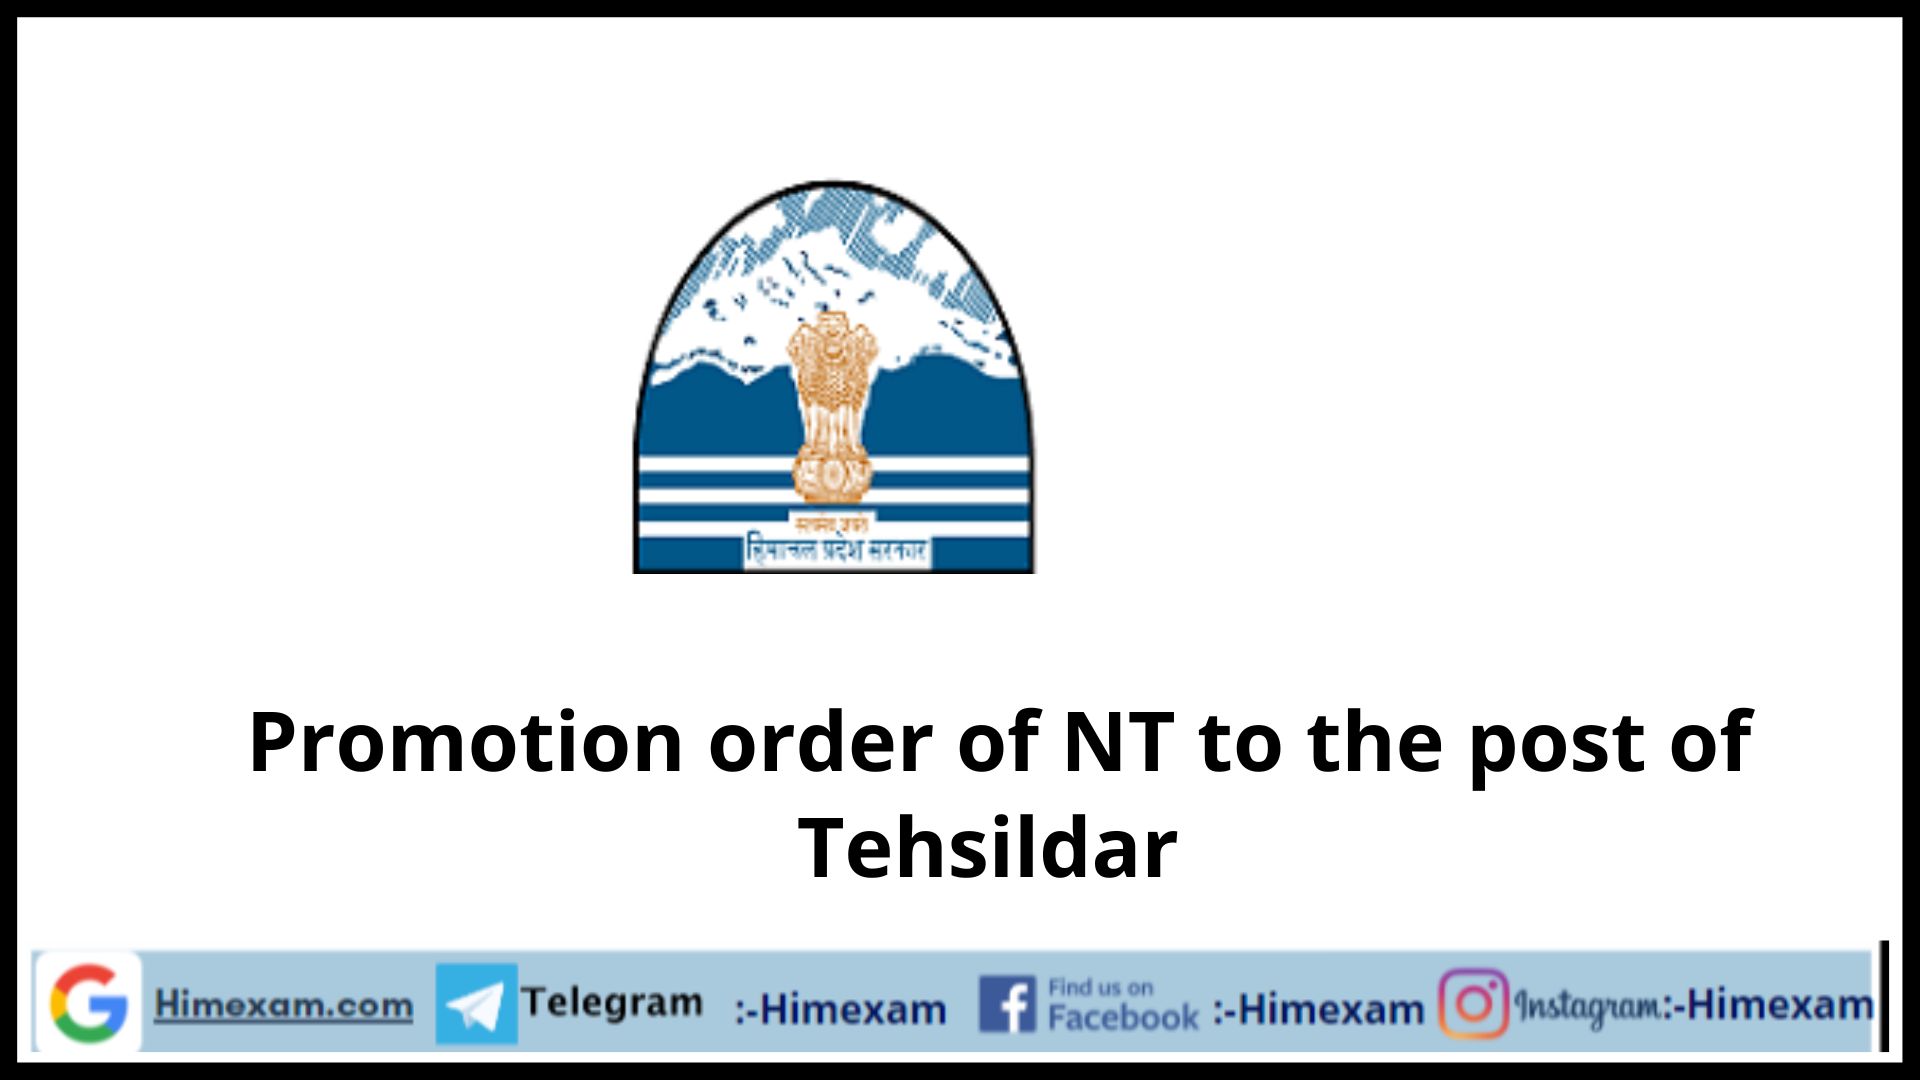 Promotion order of NT to the post of Tehsildar